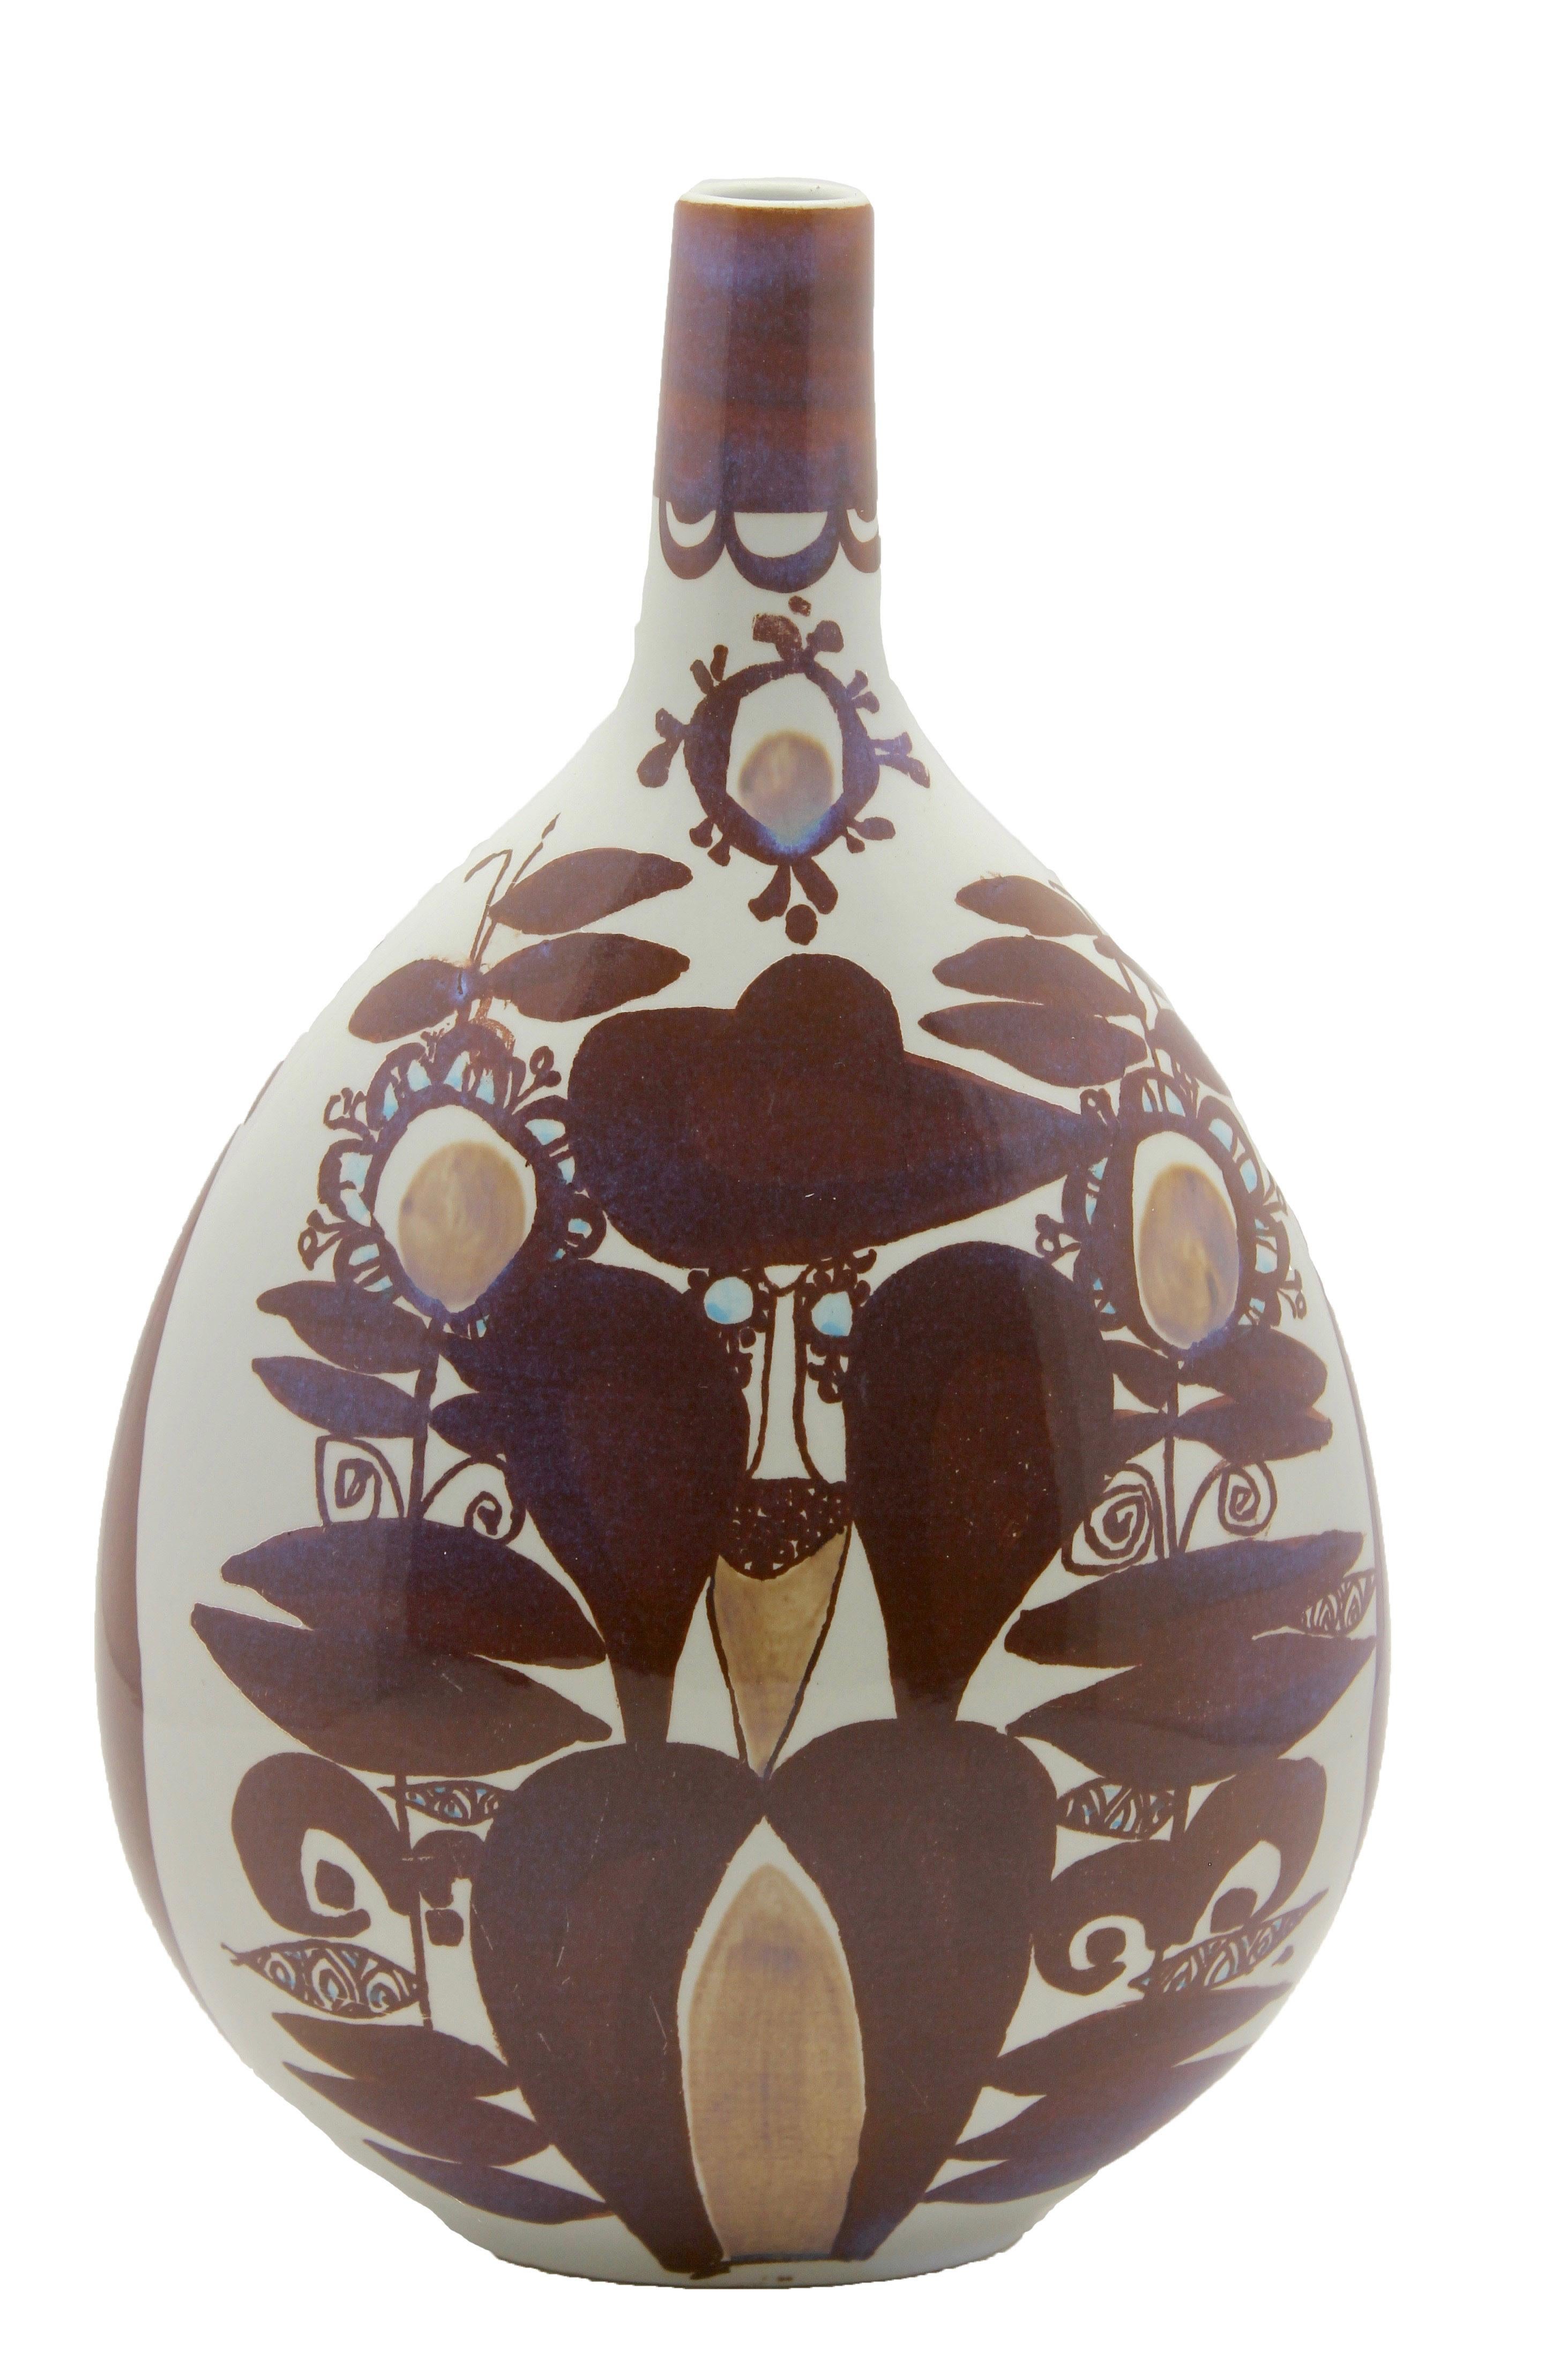 Alumia Royal Copenhagen vase Kari Christensen Danish modern Faience. 

The piece is in excellent condition and a real beauty!





 